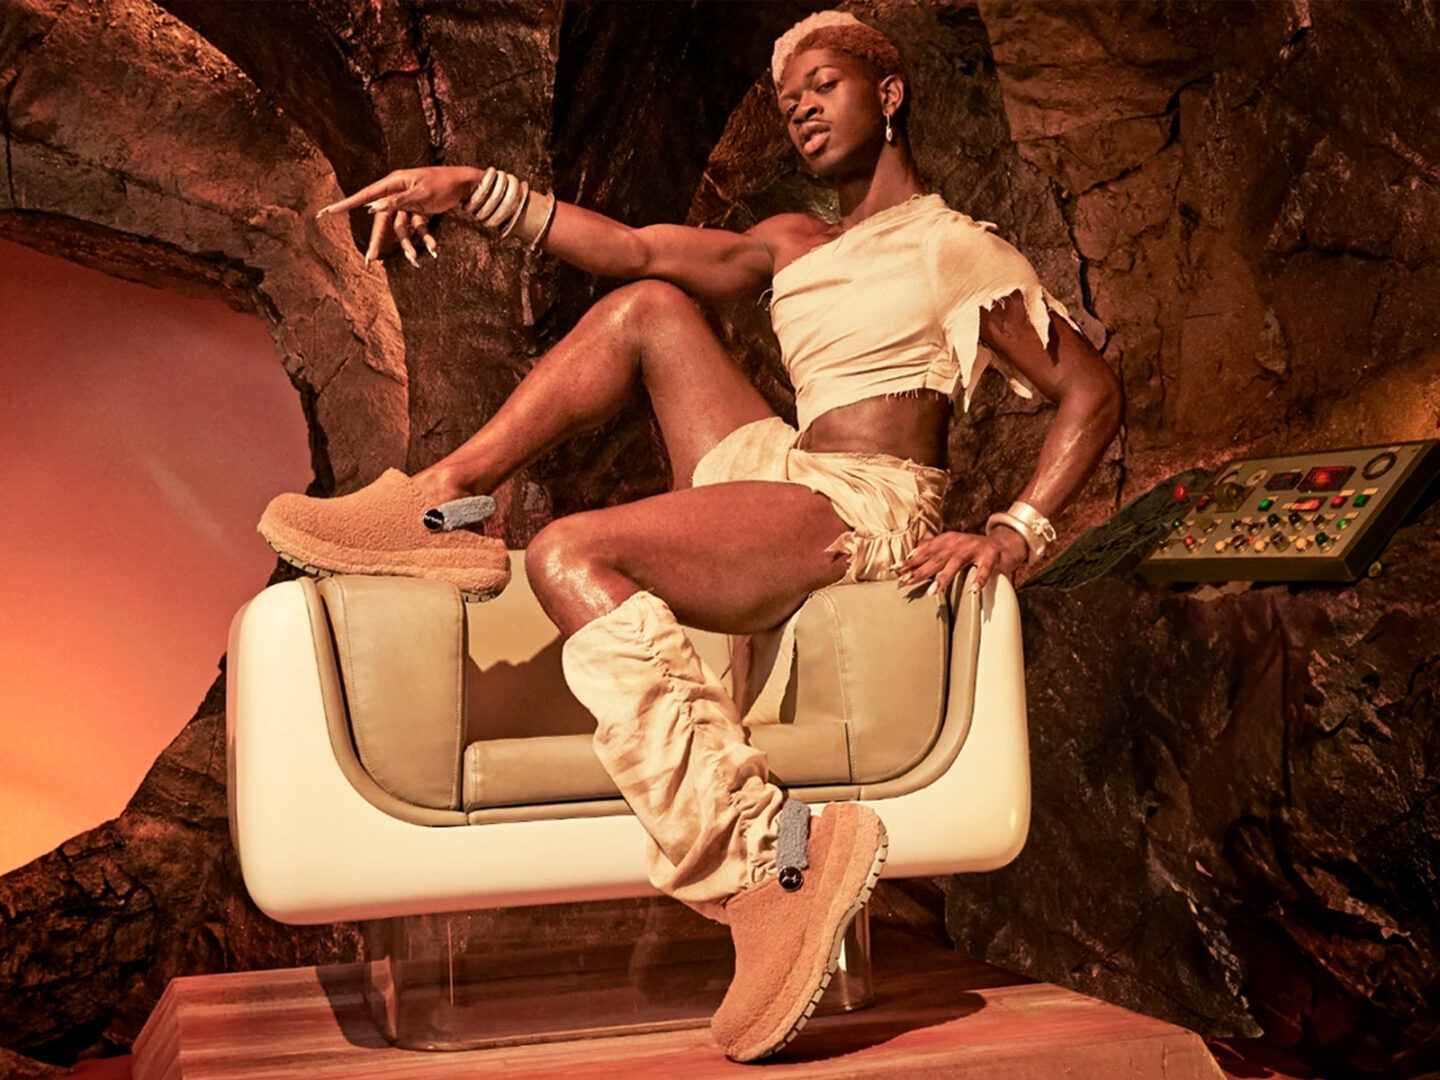 Sherpa Clog is the new release from Lil Nas X and Crocs